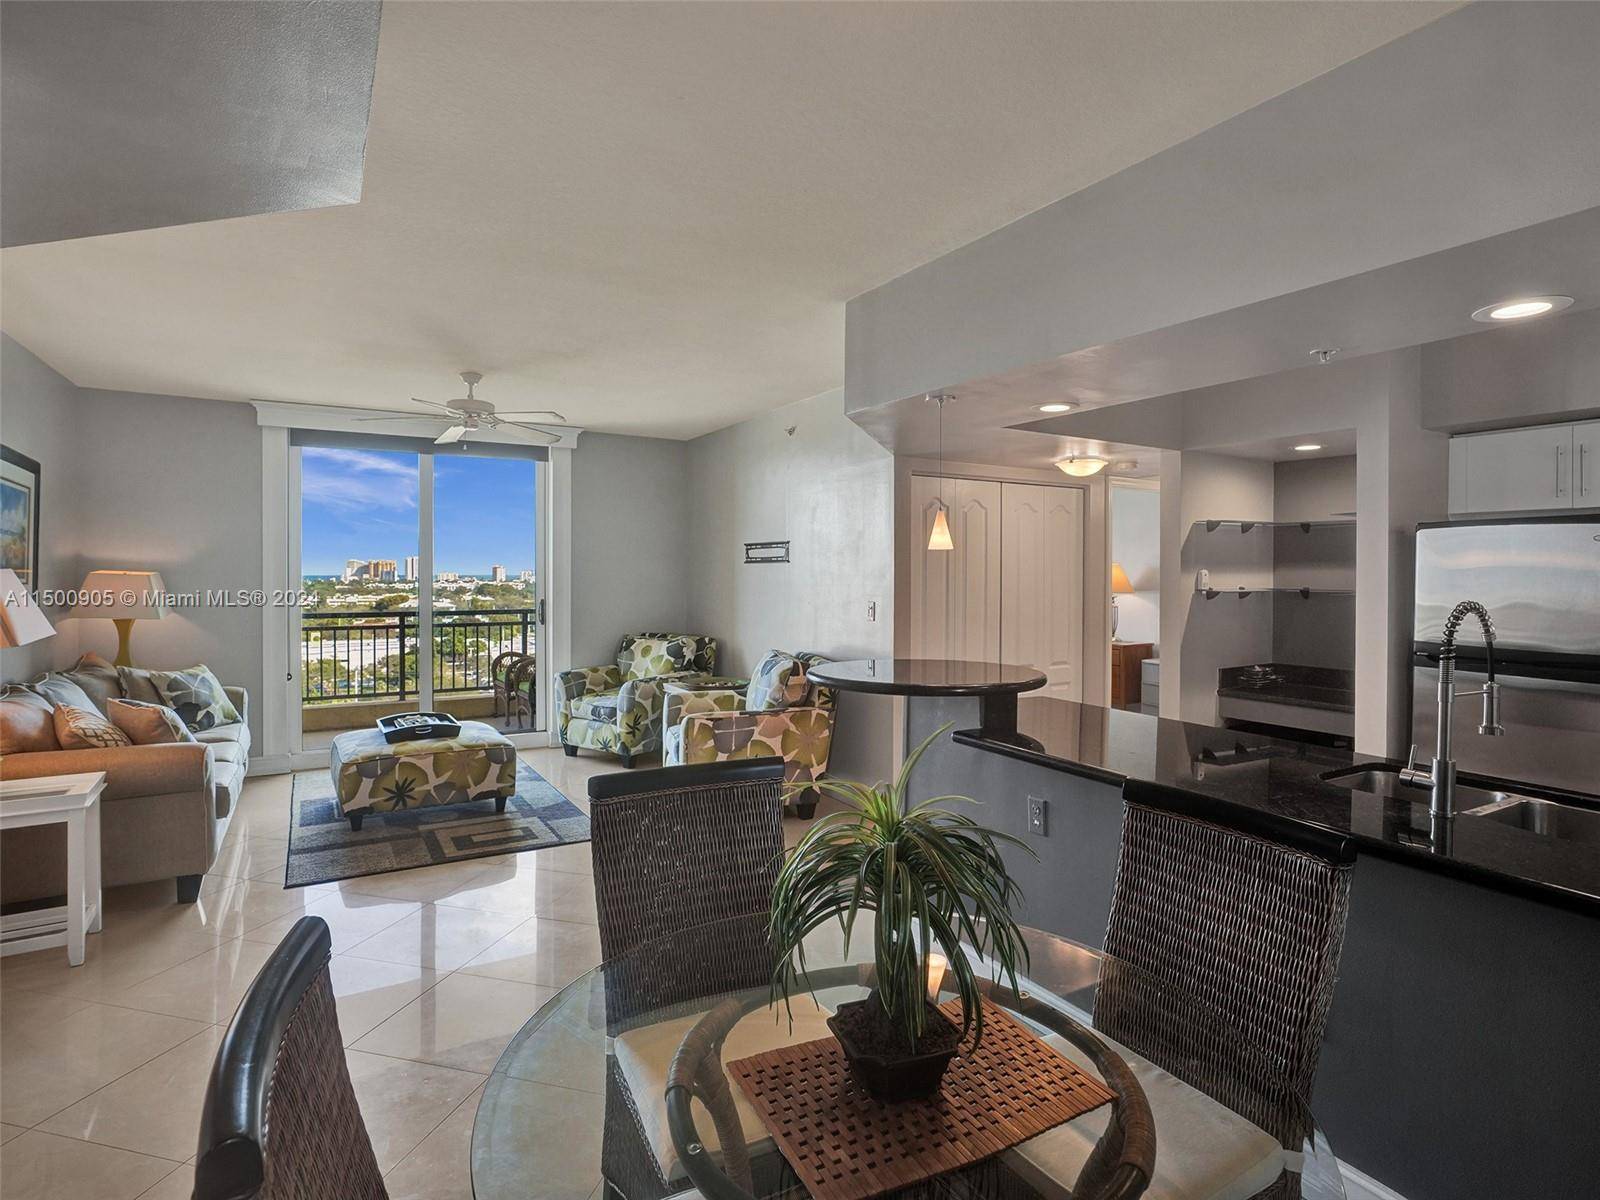 Motivated seller. Stunning sub penthouse in downtown Fort Lauderdale with direct East side ocean view.